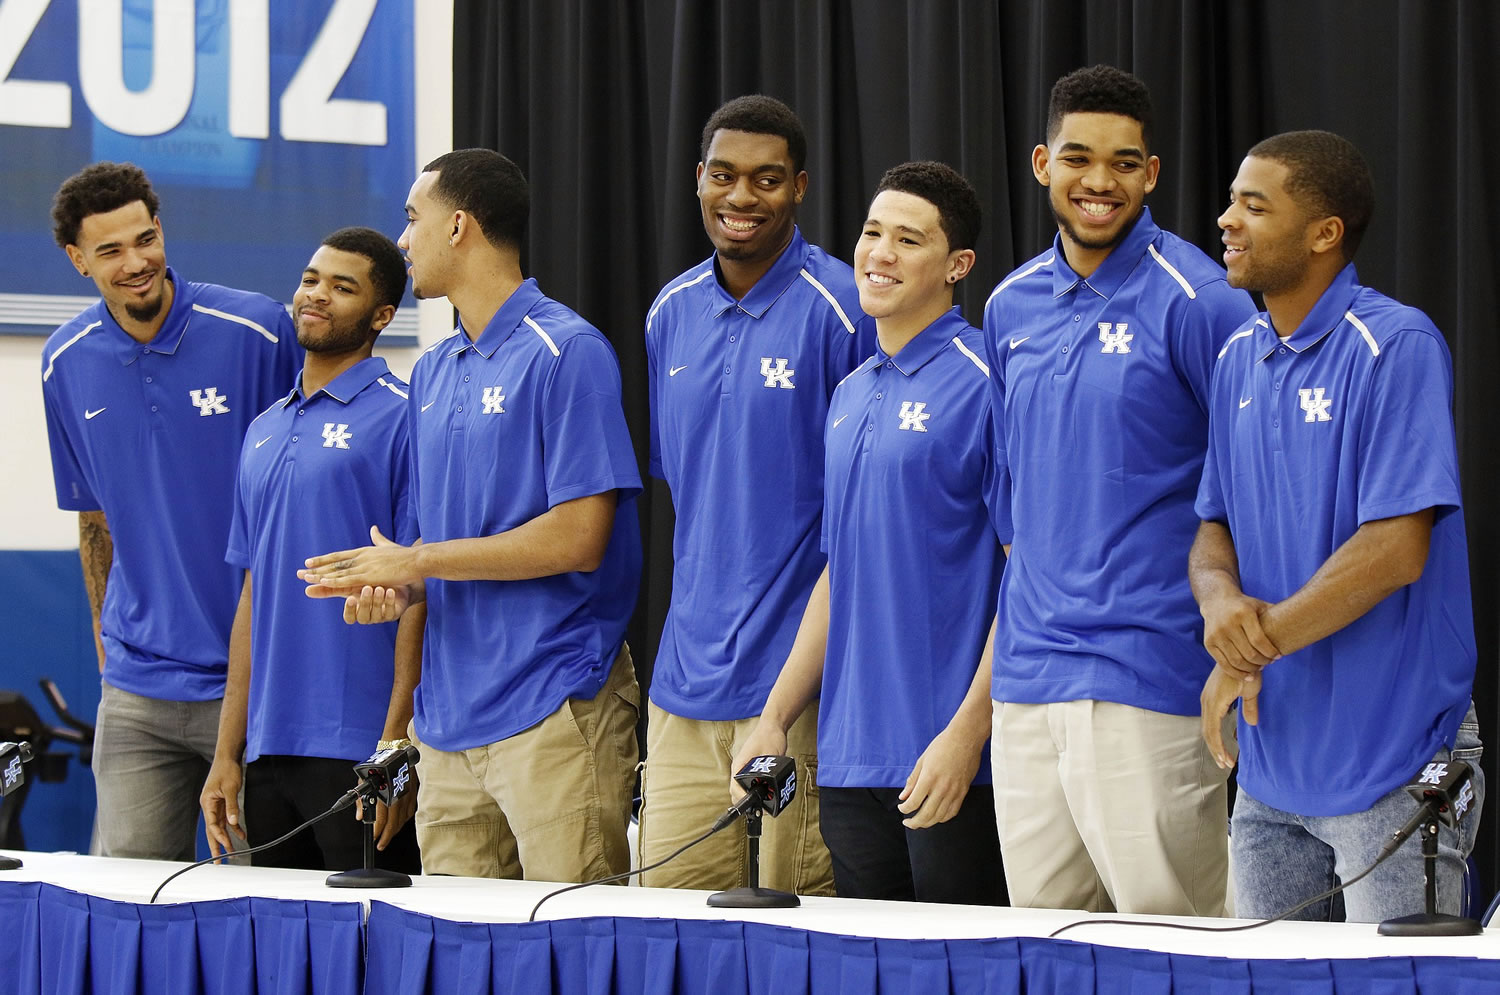 From left, Kentucky NCAA college basketball players Willie Cauley-Stein, Andrew Harrison, Trey Lyles, Dakari Johnson, Devon Booker, Karl-Anthony Towns and Aaron Harrison stand during a news conference where they announced Thursday, April 9, 2015, their intent to place their names in the NBA draft.